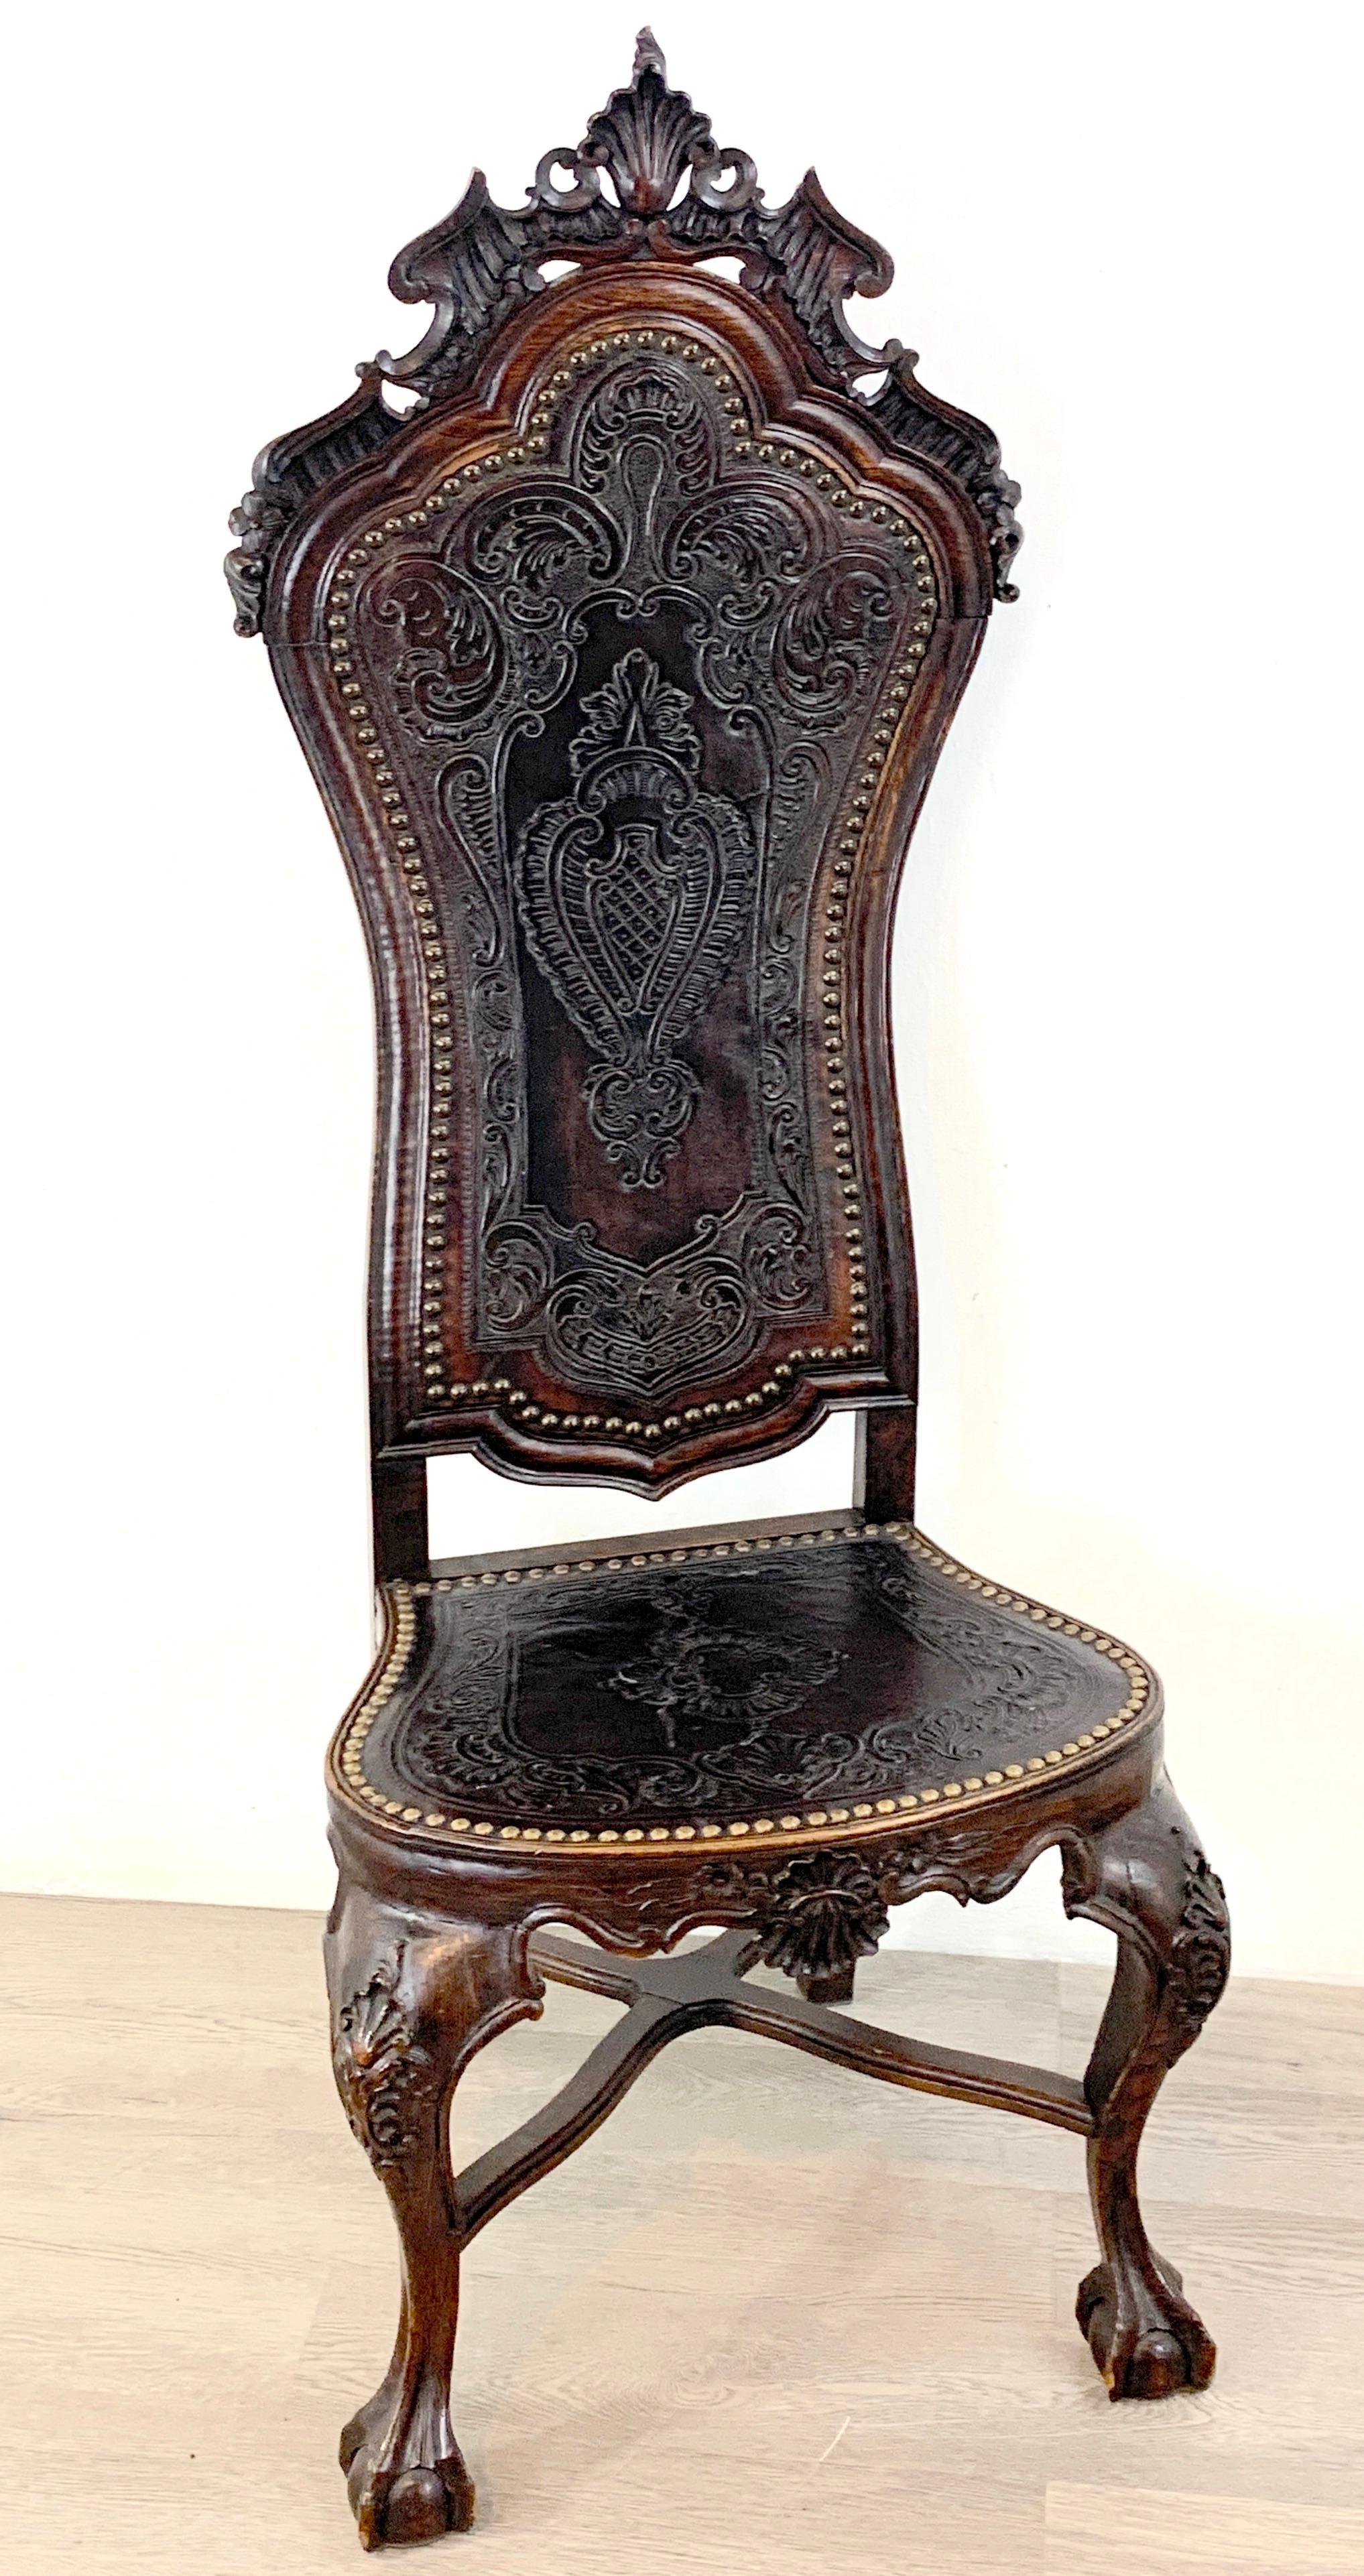 18th C Portuguese carved Mahogany and embossed leather highback chair
With shell cartouche back, exquisite embossed leather backrest and seat, with brass nail heads. 
Supported on cabriole legs with ball and claw feet. 
Measures: 58